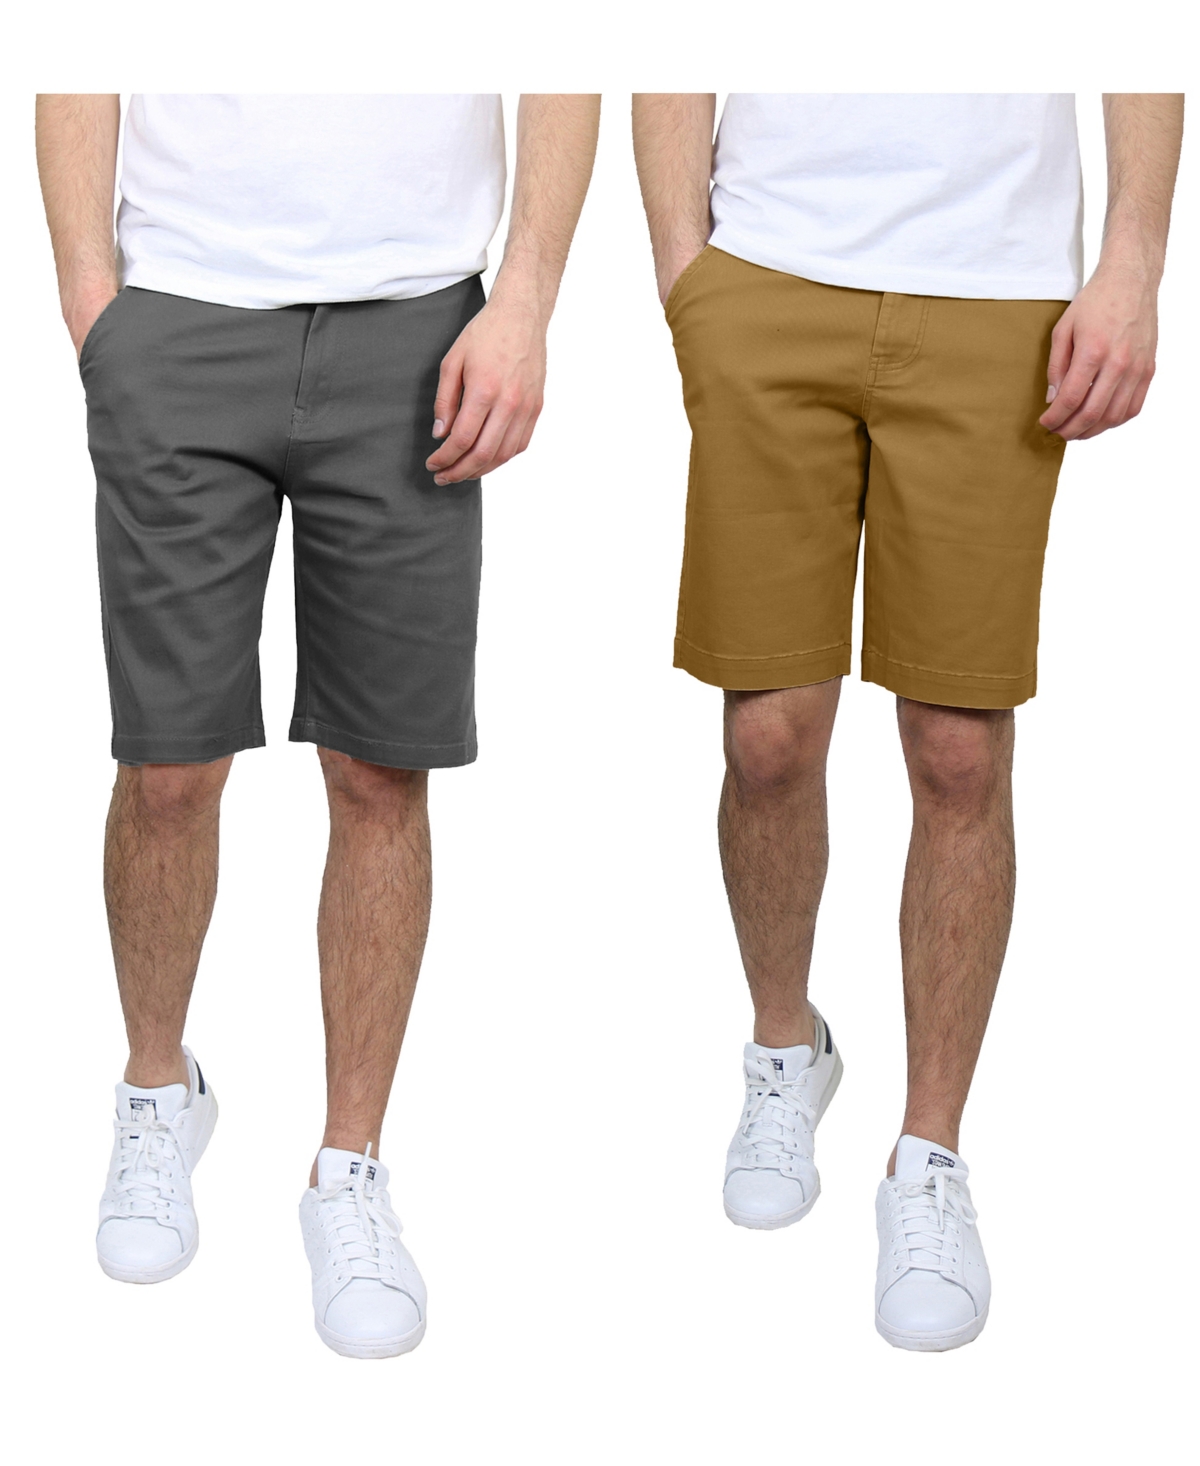 Men's 5 Pocket Flat Front Slim Fit Stretch Chino Shorts, Pack of 2 - Khaki, Timber